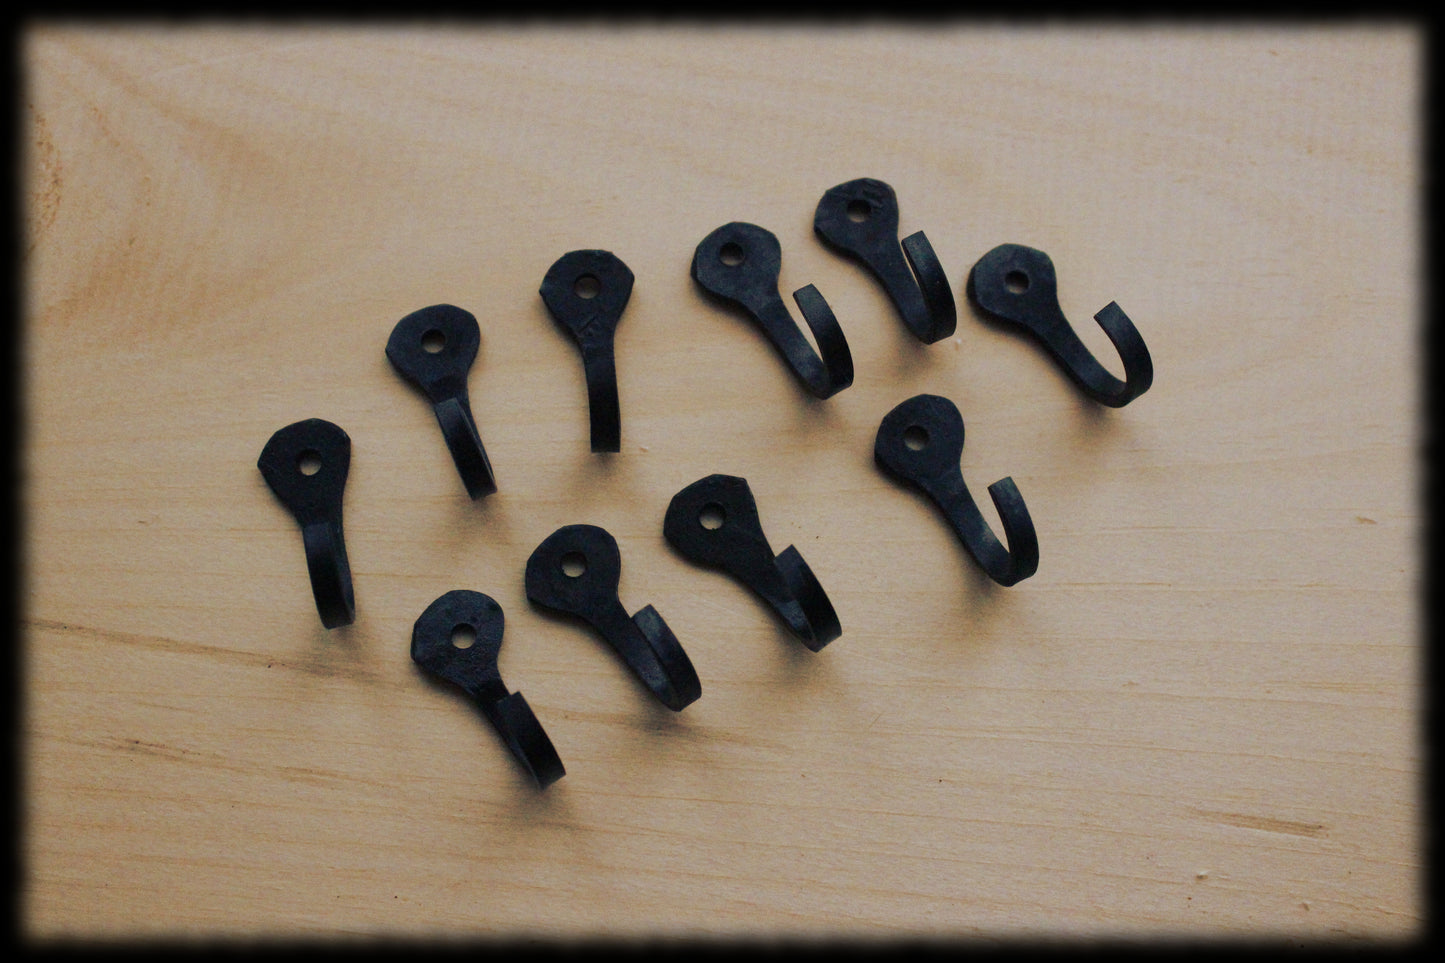 10 Small Rustic Metal Wall Hooks 1 1/4 (32mm) Nail hooks lot with